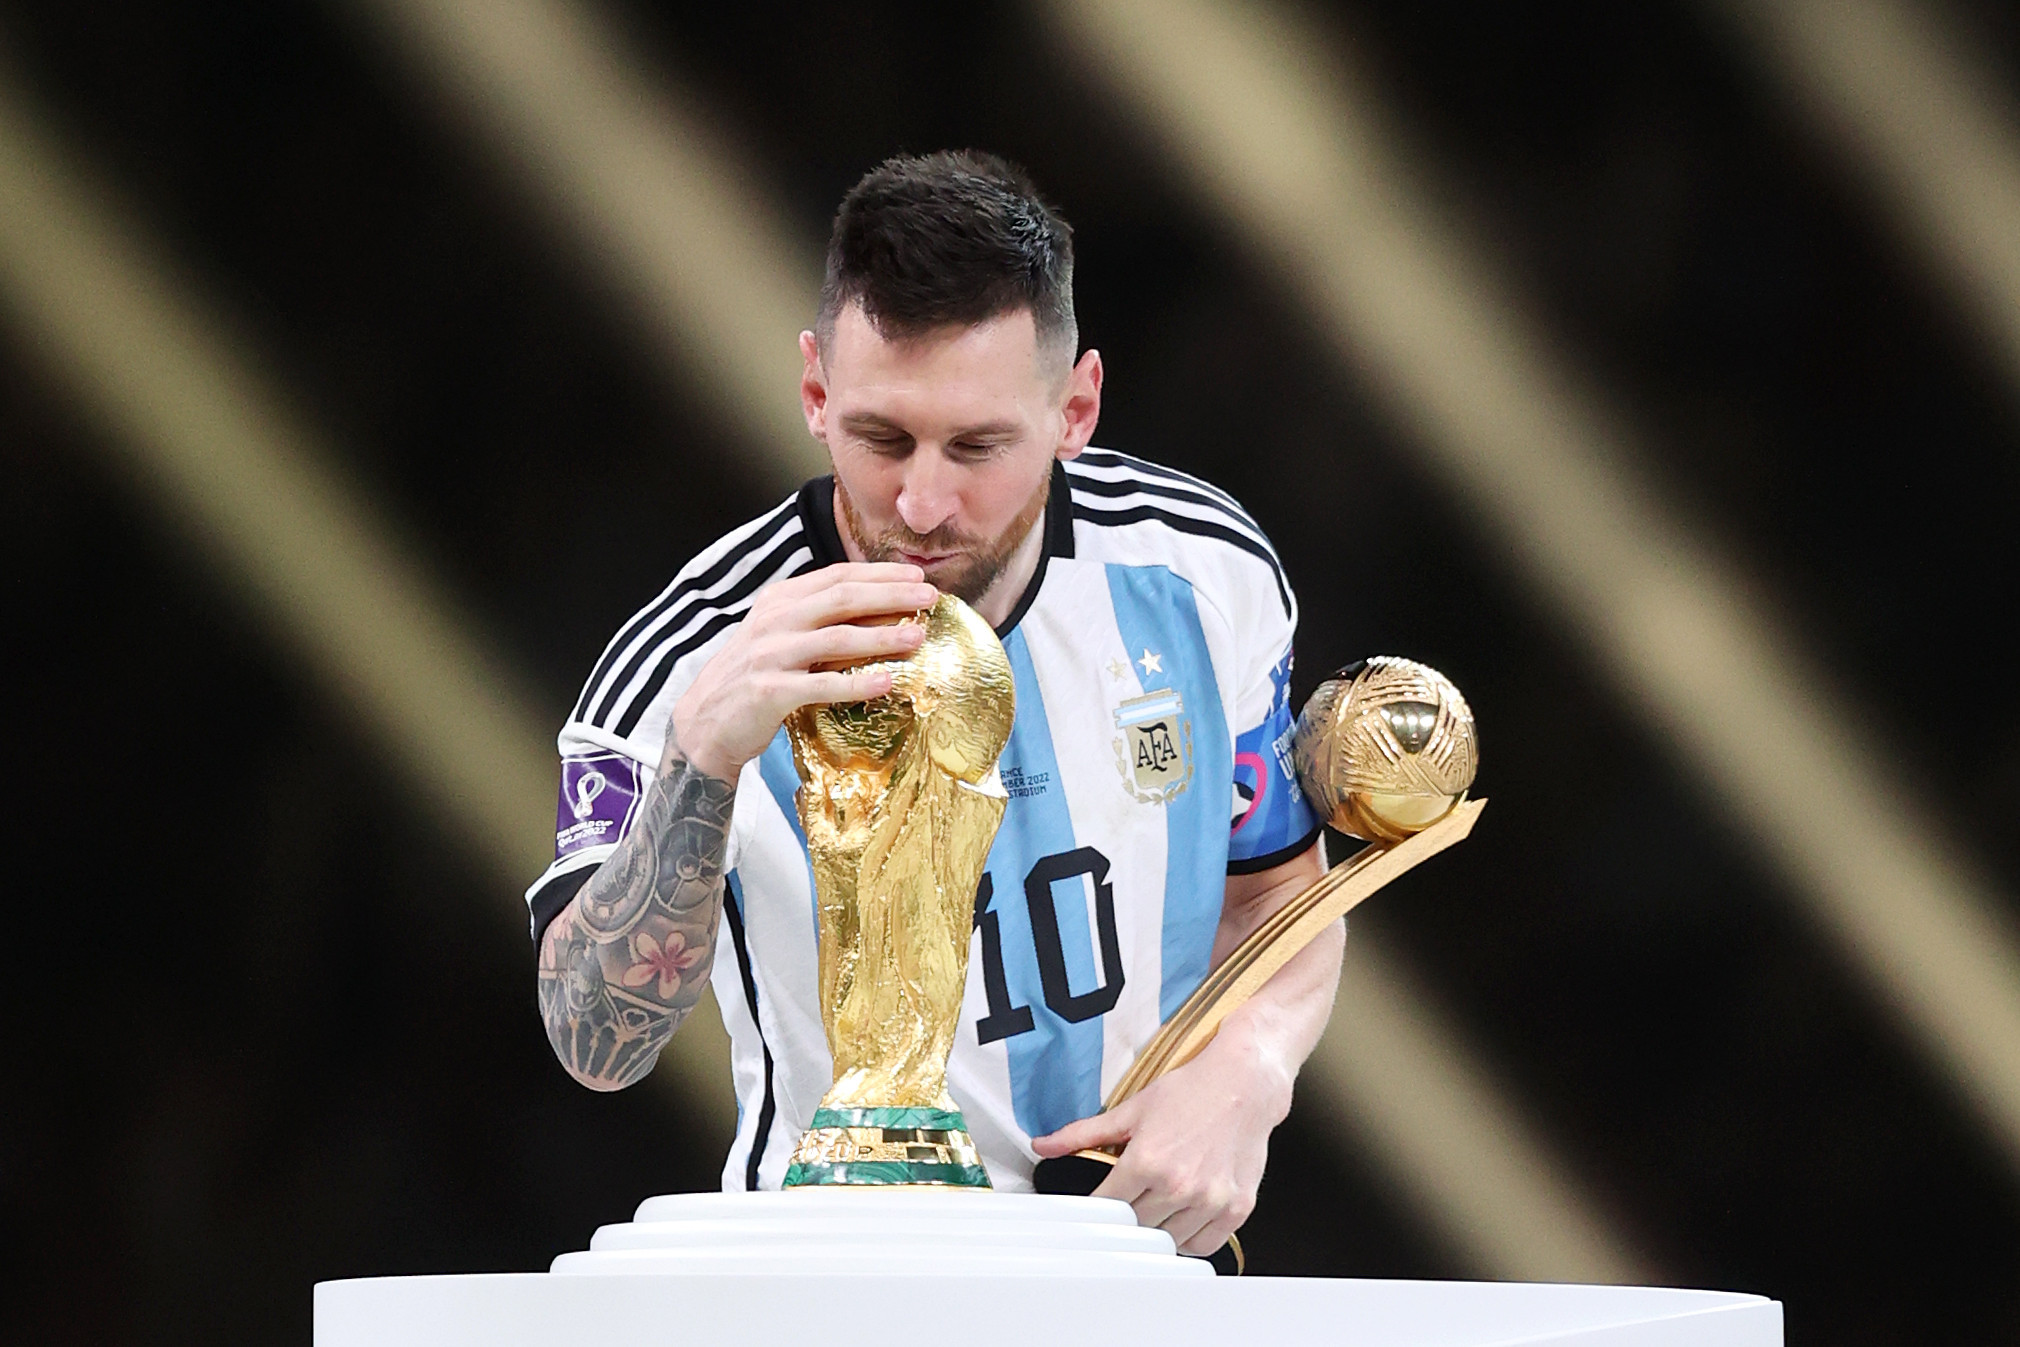 Lionel Messi won the World Cup with Argentina last year and Thomas Bach wants him to target a second Olympic gold ©Getty Images